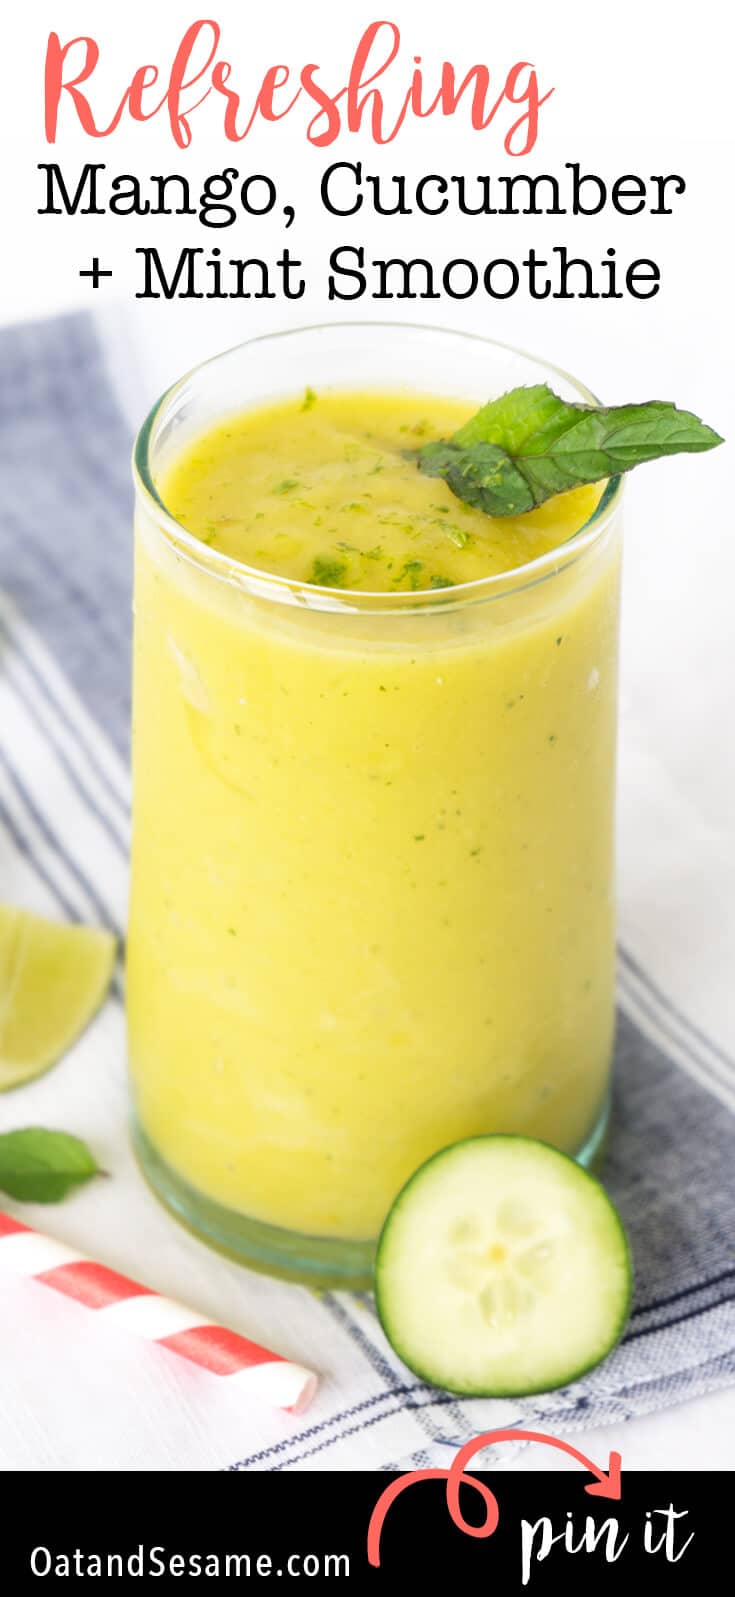 Mango Cucumber Smoothie in a glass with a slice of cucumber next to it